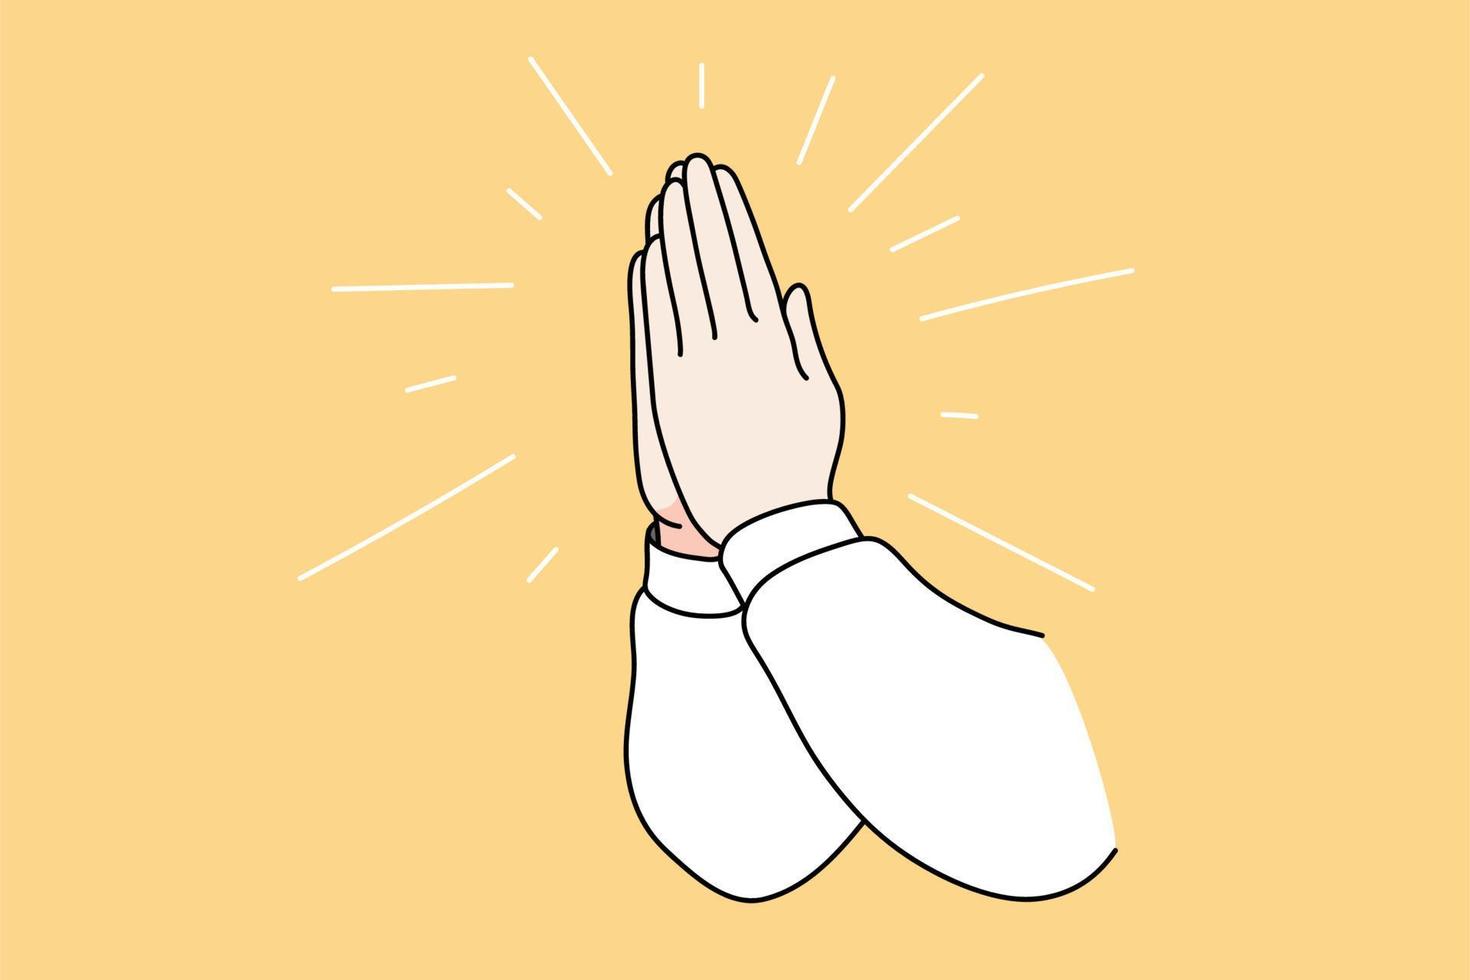 Praying religion and spirituality concept. Human hands pulling in religious gesture praying to god for better spiritual blessing vector illustration